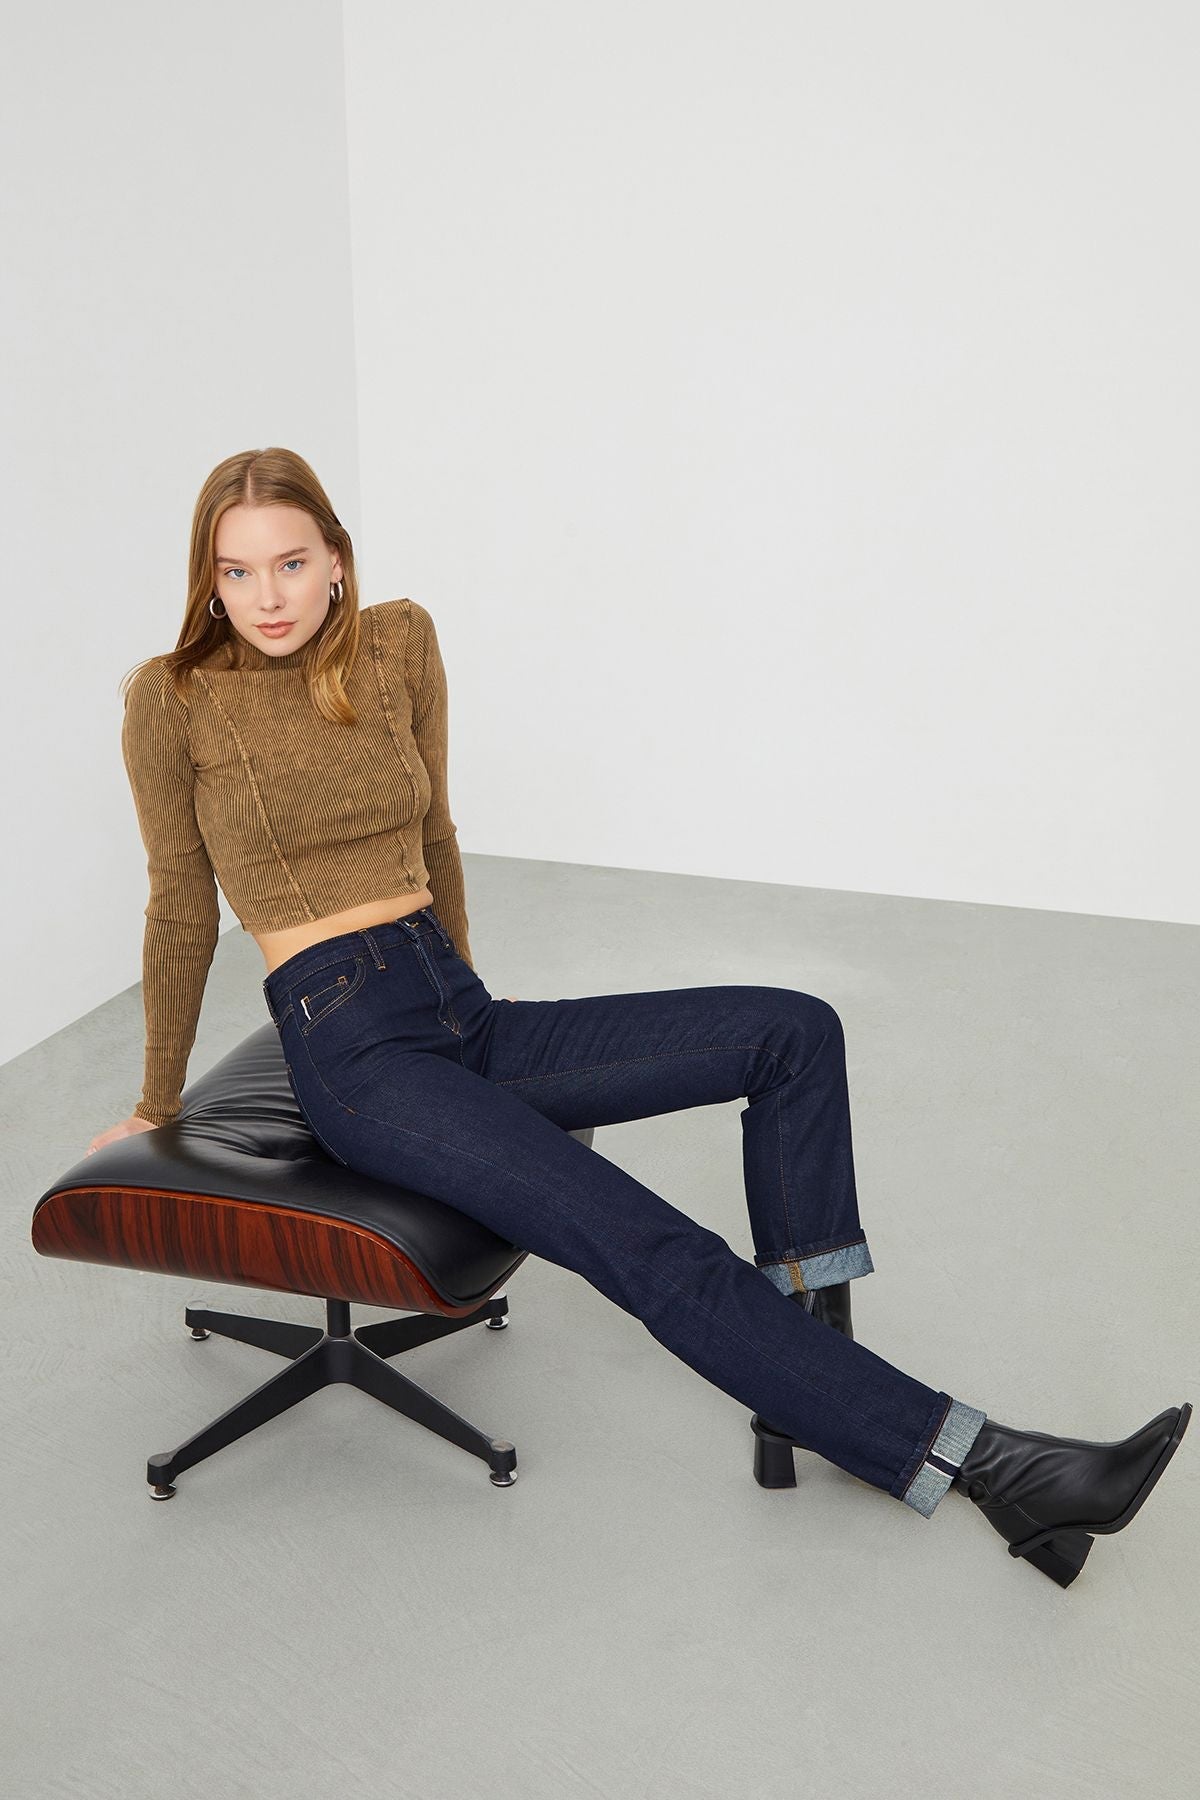 Fashionista's choice: A young woman wears MIRA Boyfriend Fit Dark Blue Selvedge Women's Jeans for effortless style.